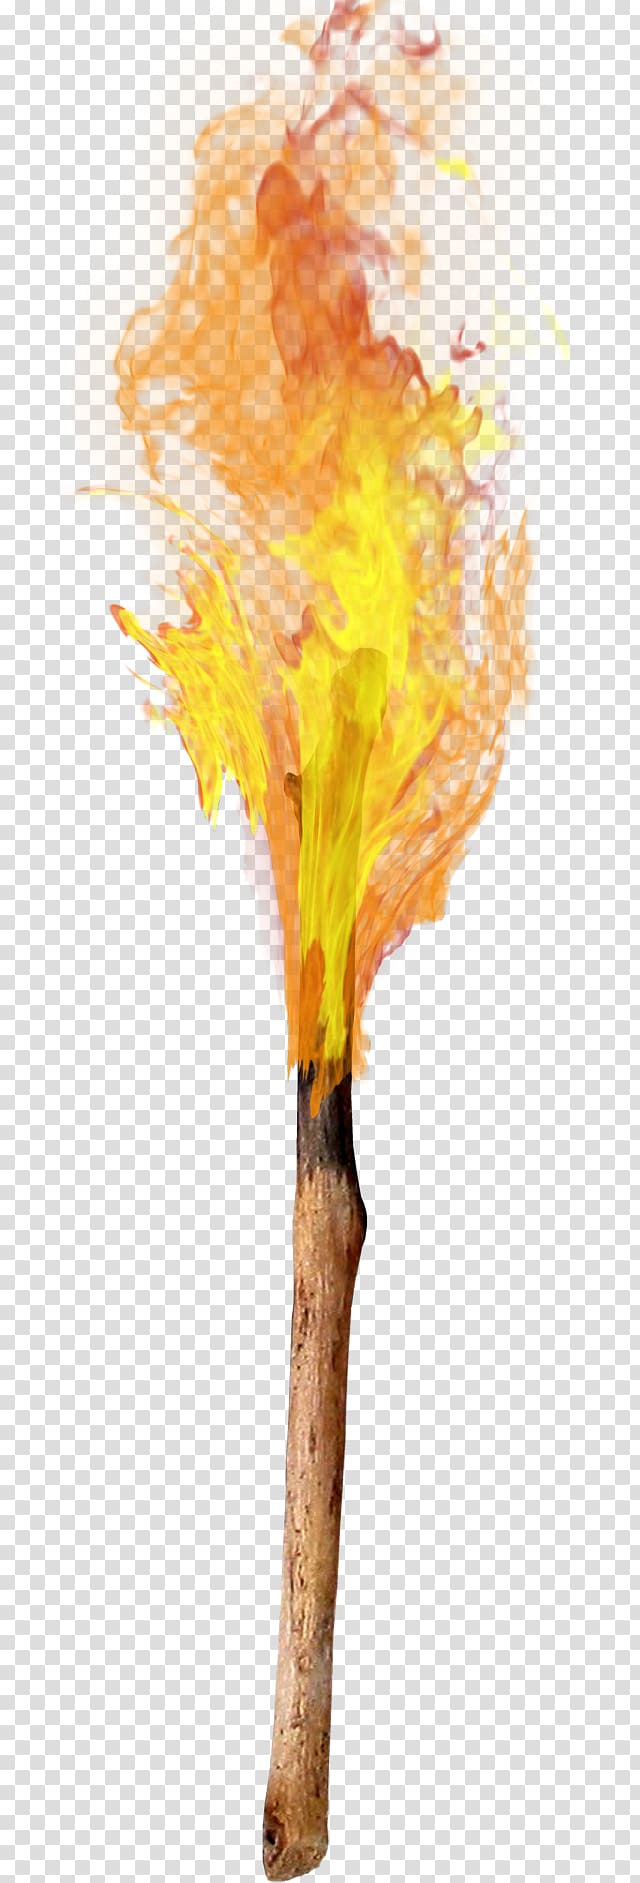 torch flames clipart image